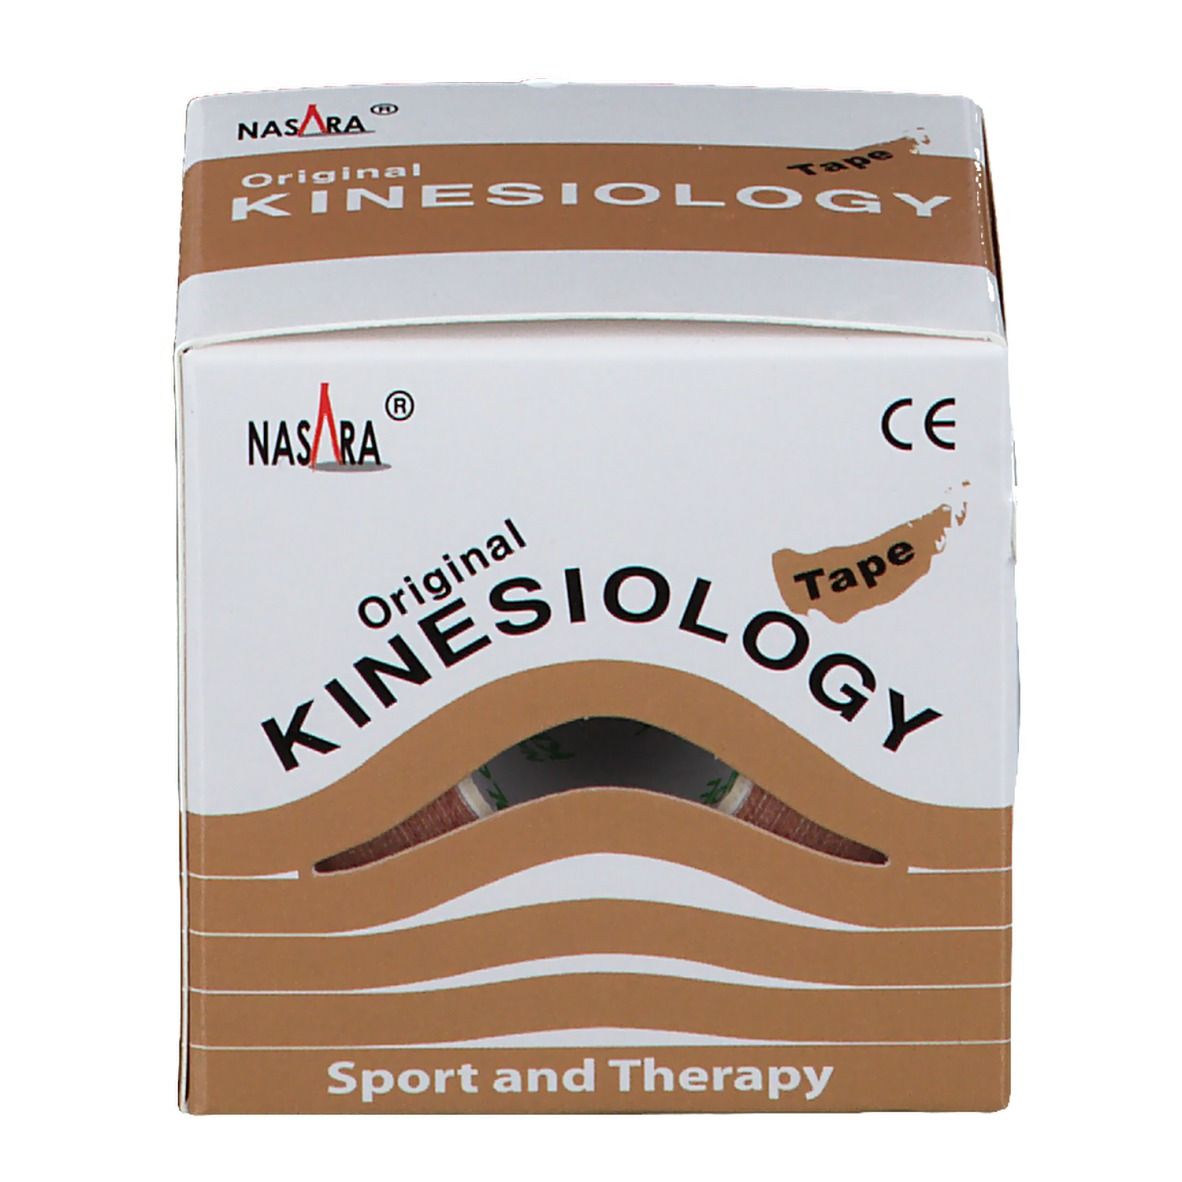 NASARA® Kinesiology-Tape classic 5 cm x 5 m Rolle Beige